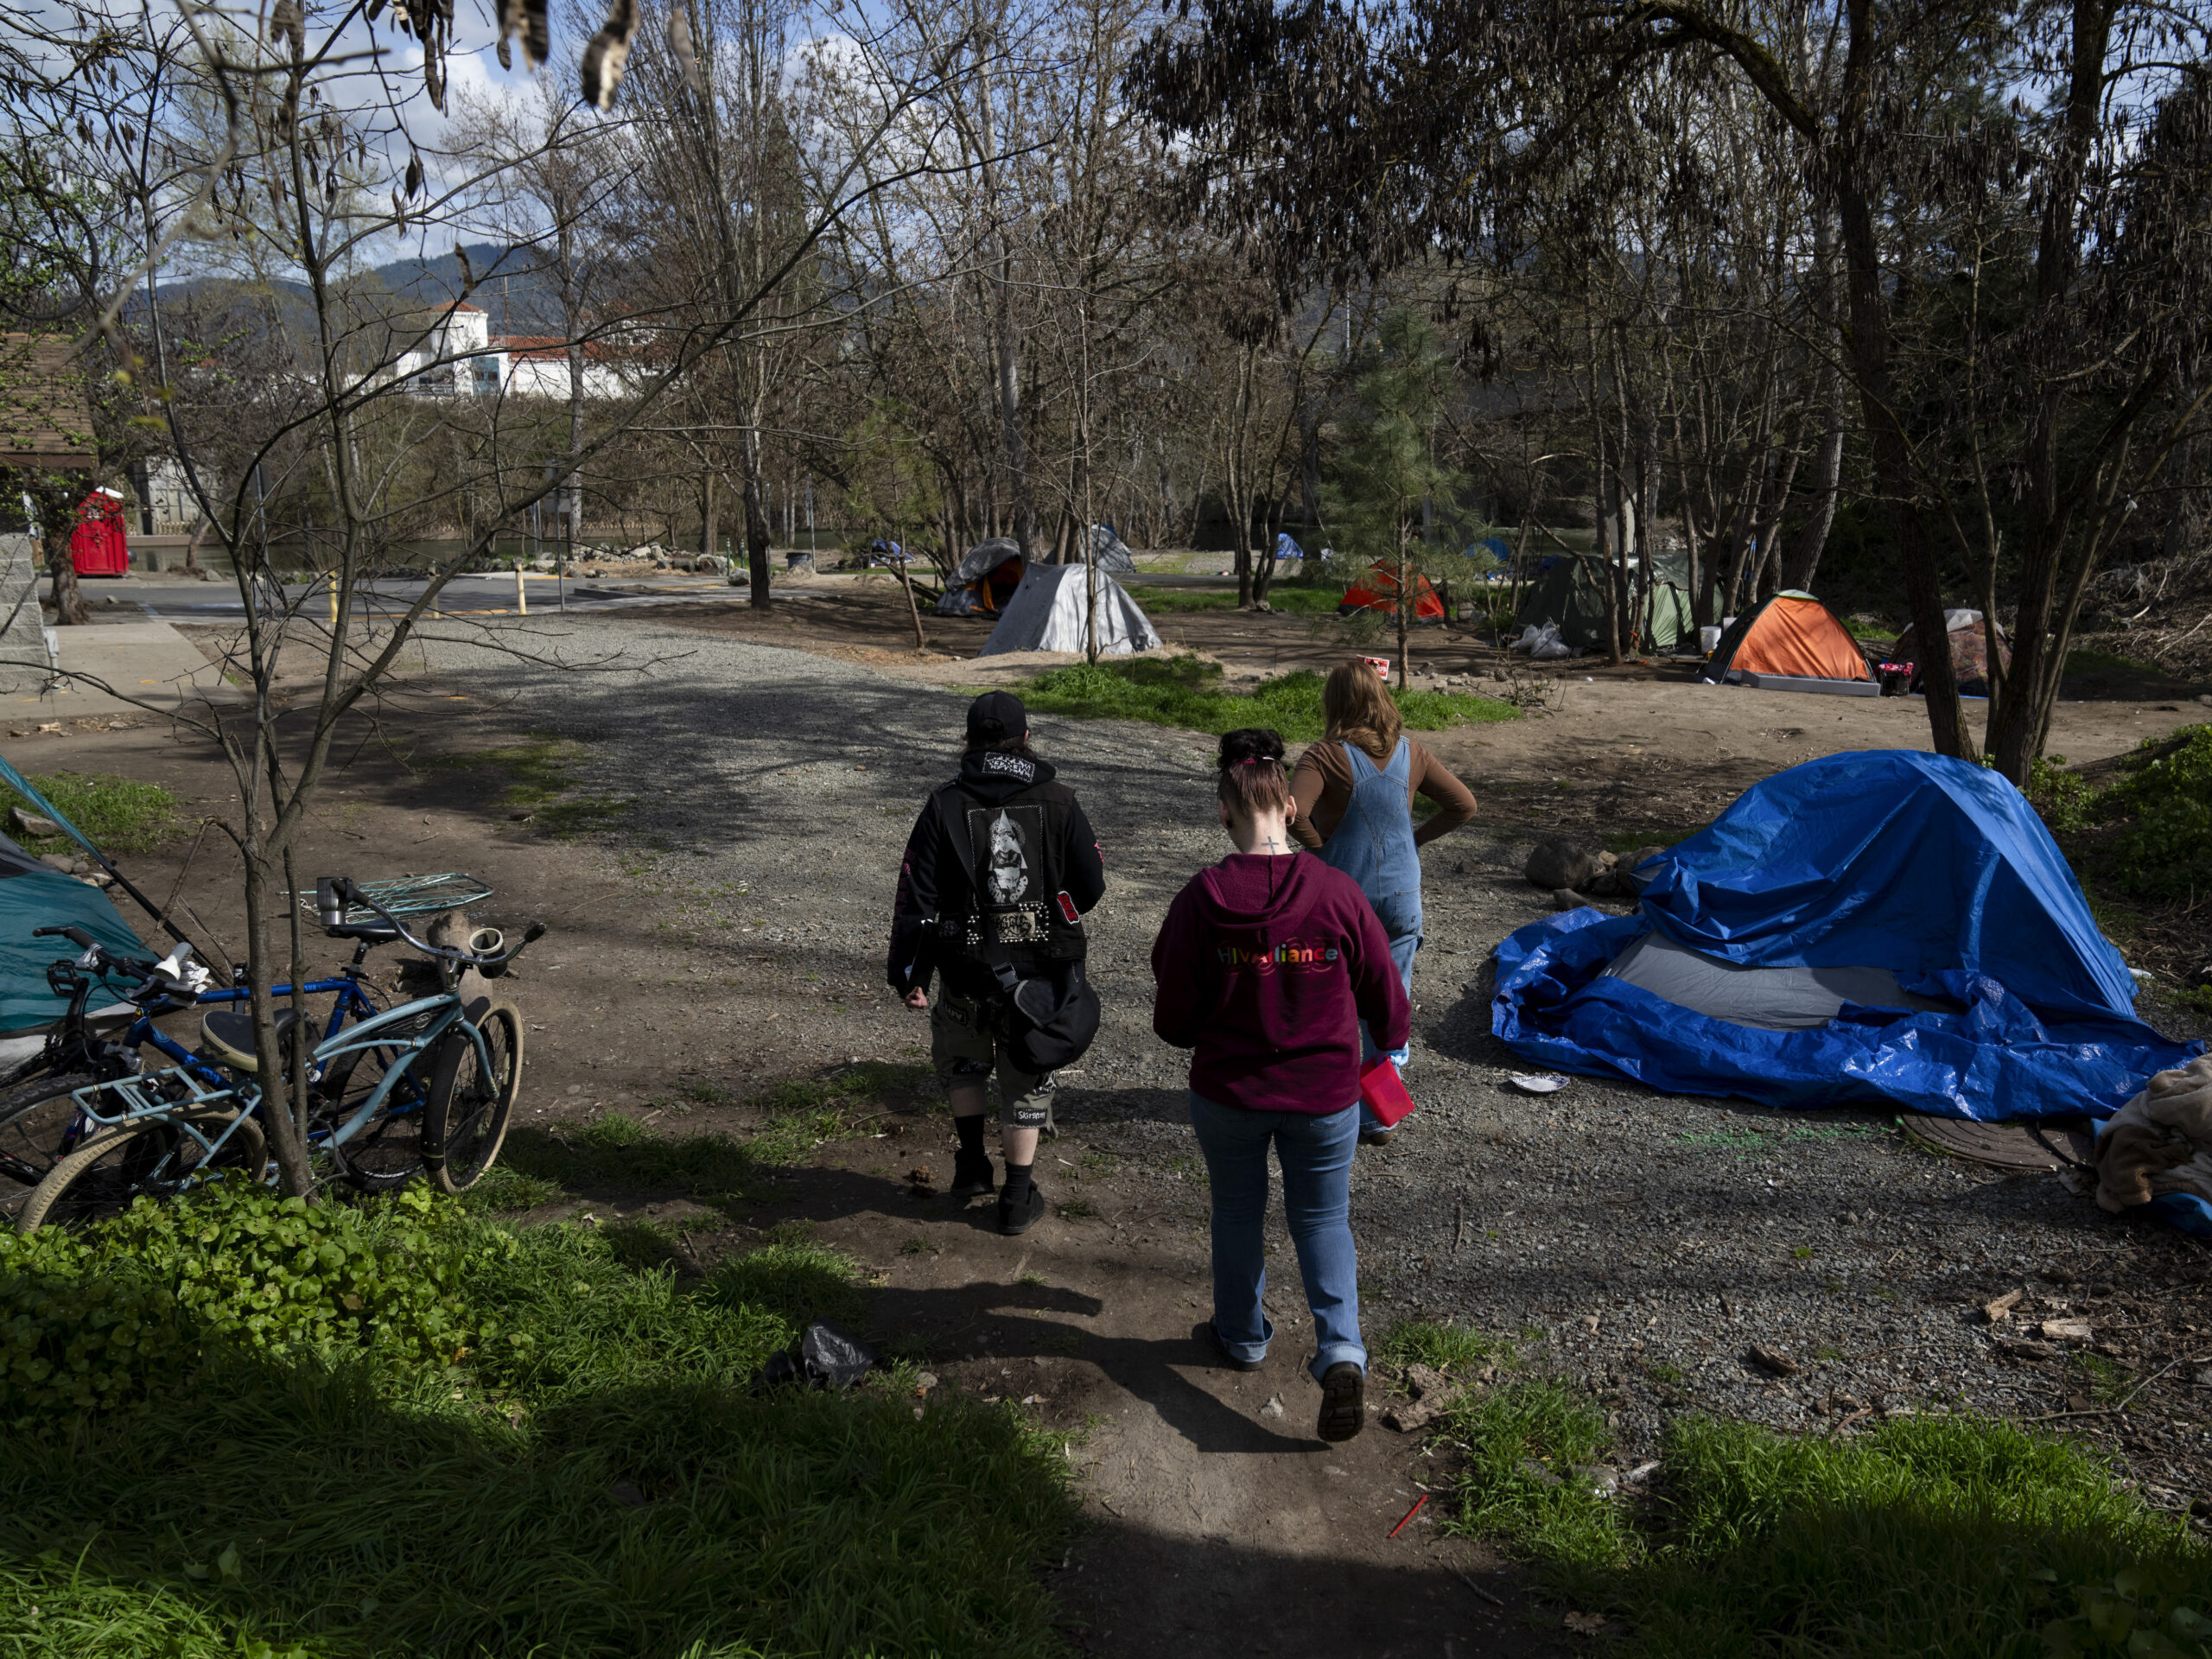 Supreme Court appears to side with an Oregon city’s crackdown on homelessness